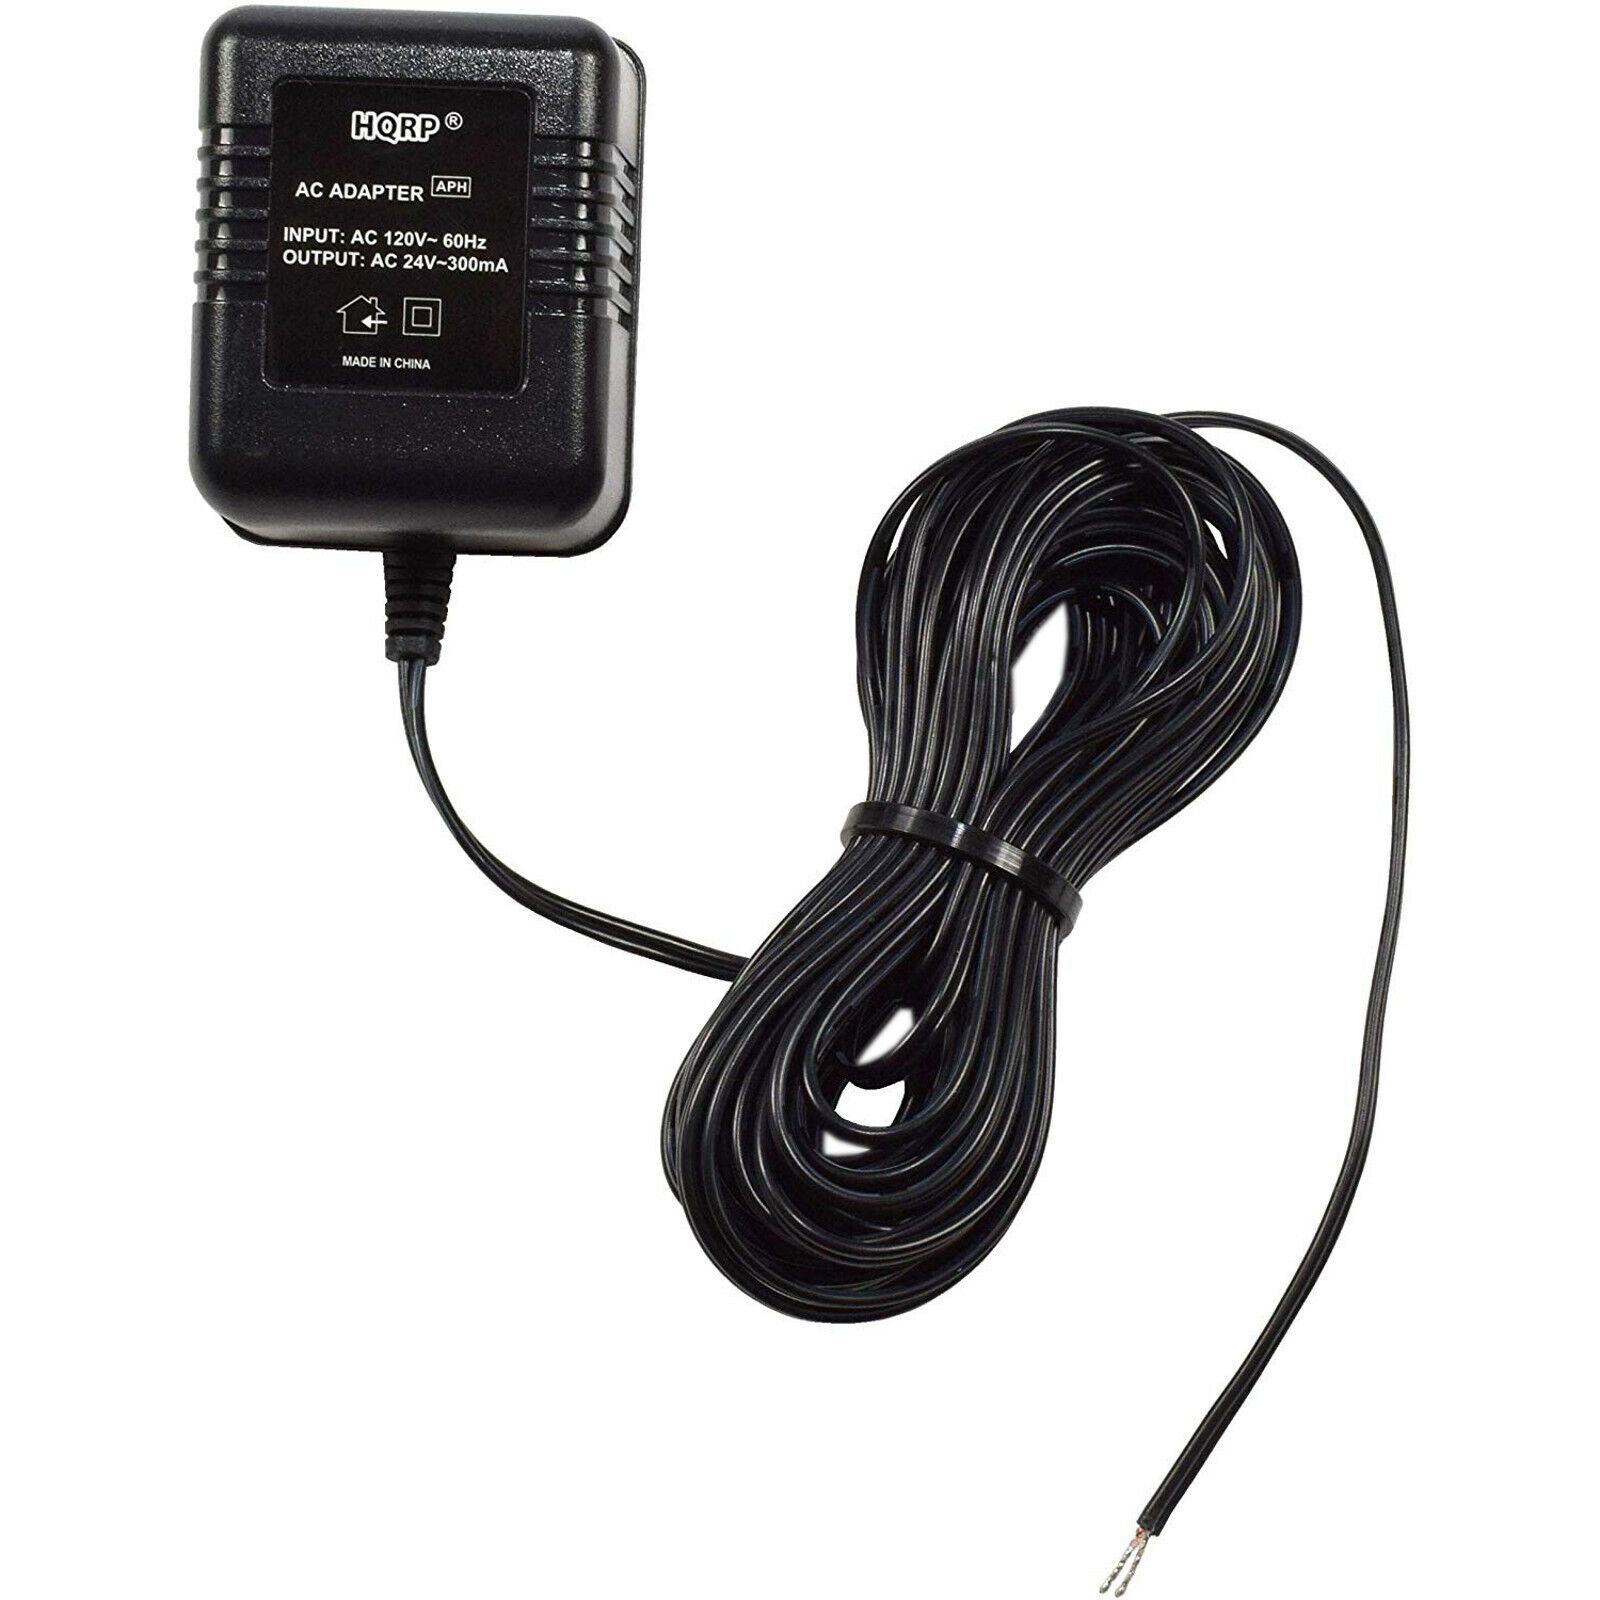 HQRP 24V AC Adapter Transformer for Ring Doorbell Thermostats C-Wire 25ft Cable